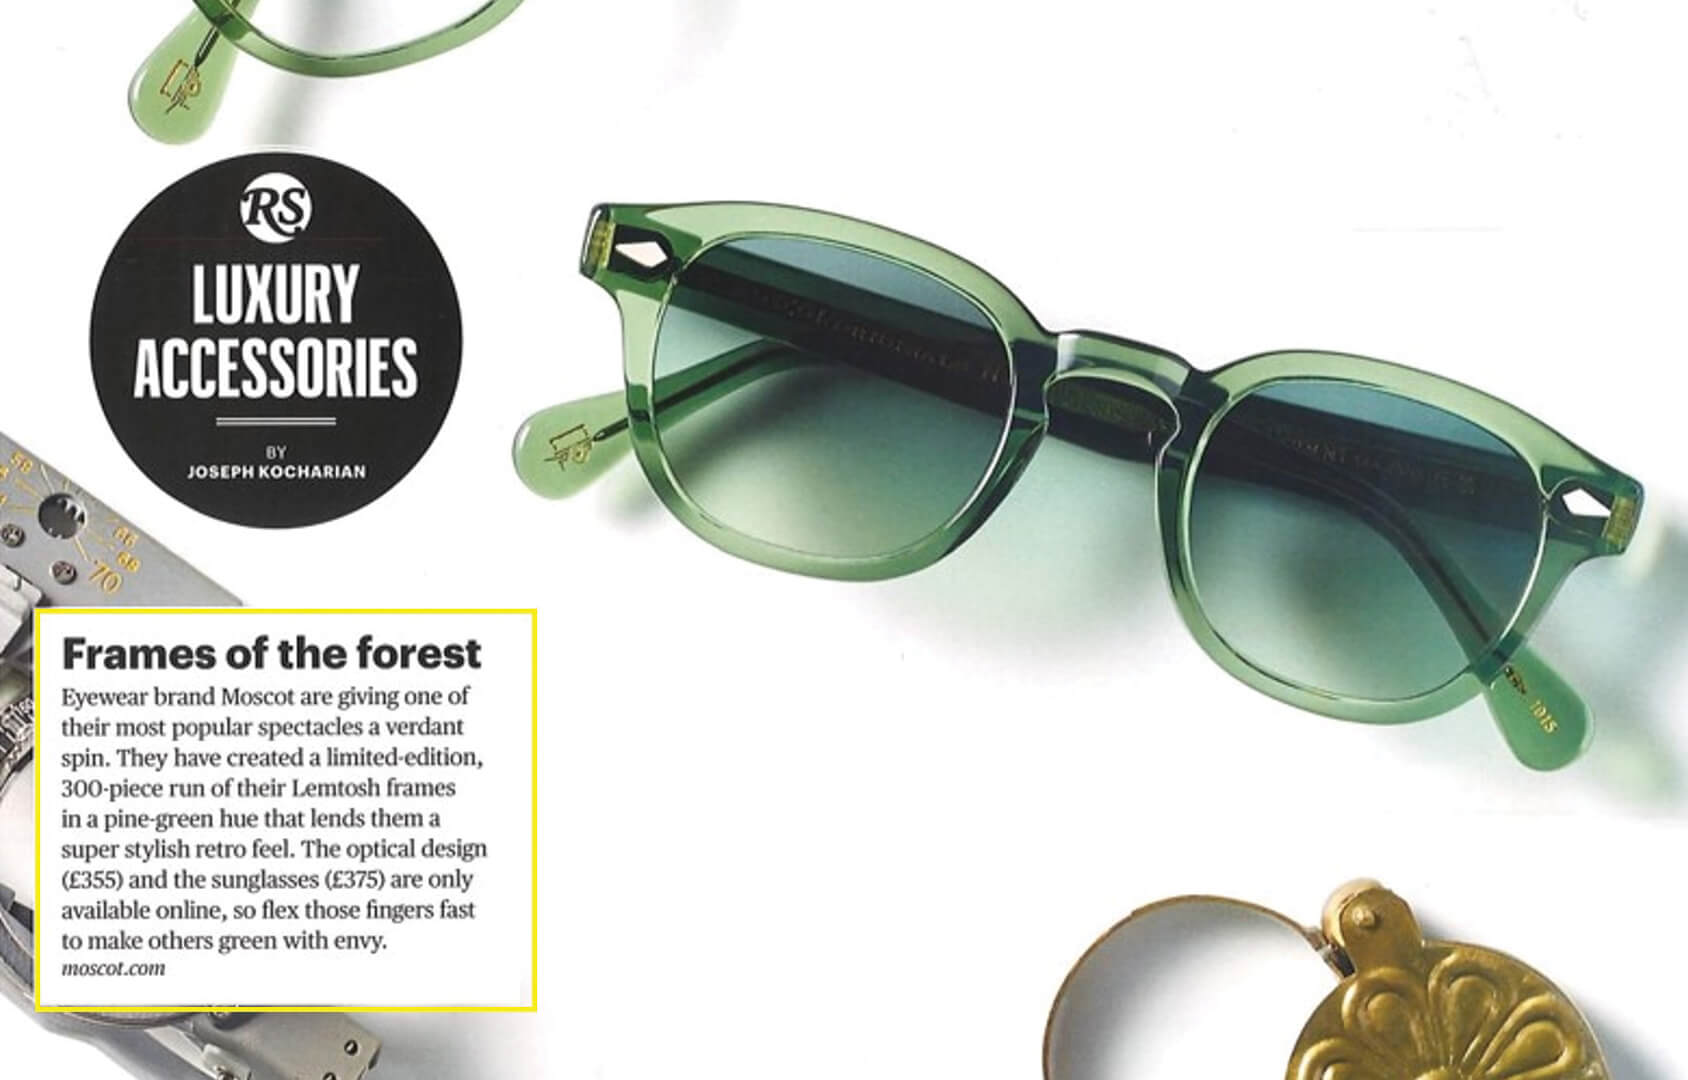 Rolling Stone favors the Exclusive LEMTOSH in Pine in their Round up of Luxury Accessories 